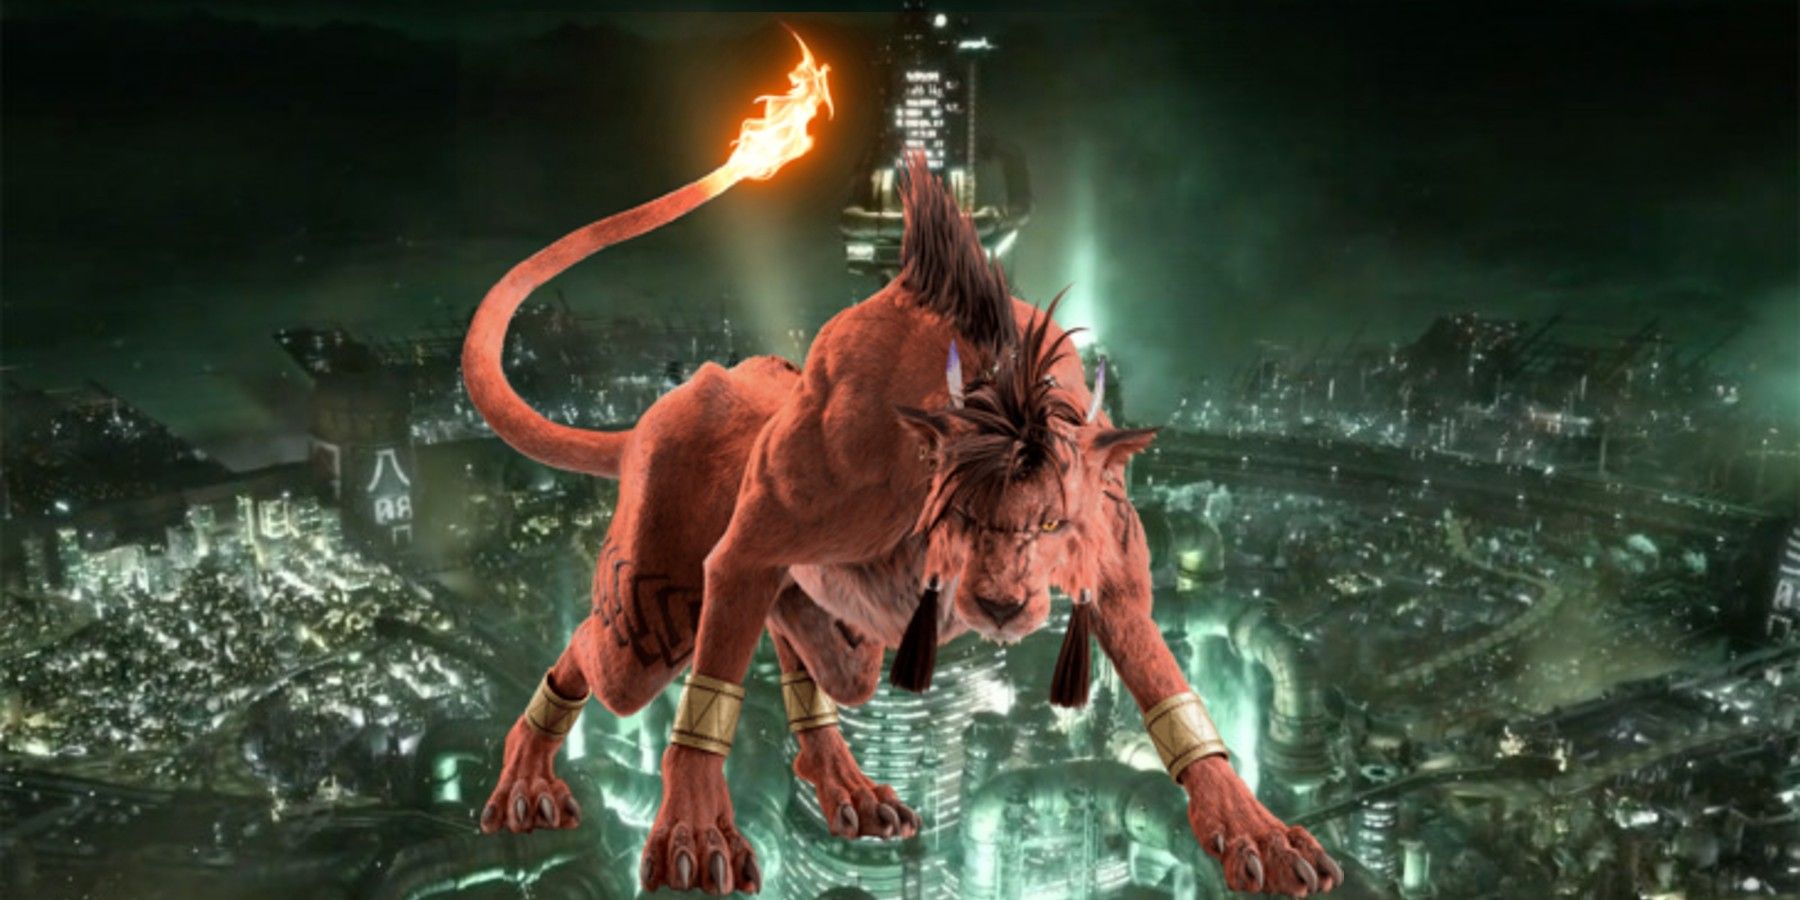 Red XIII, FINAL FANTASY VII EVER CRISIS